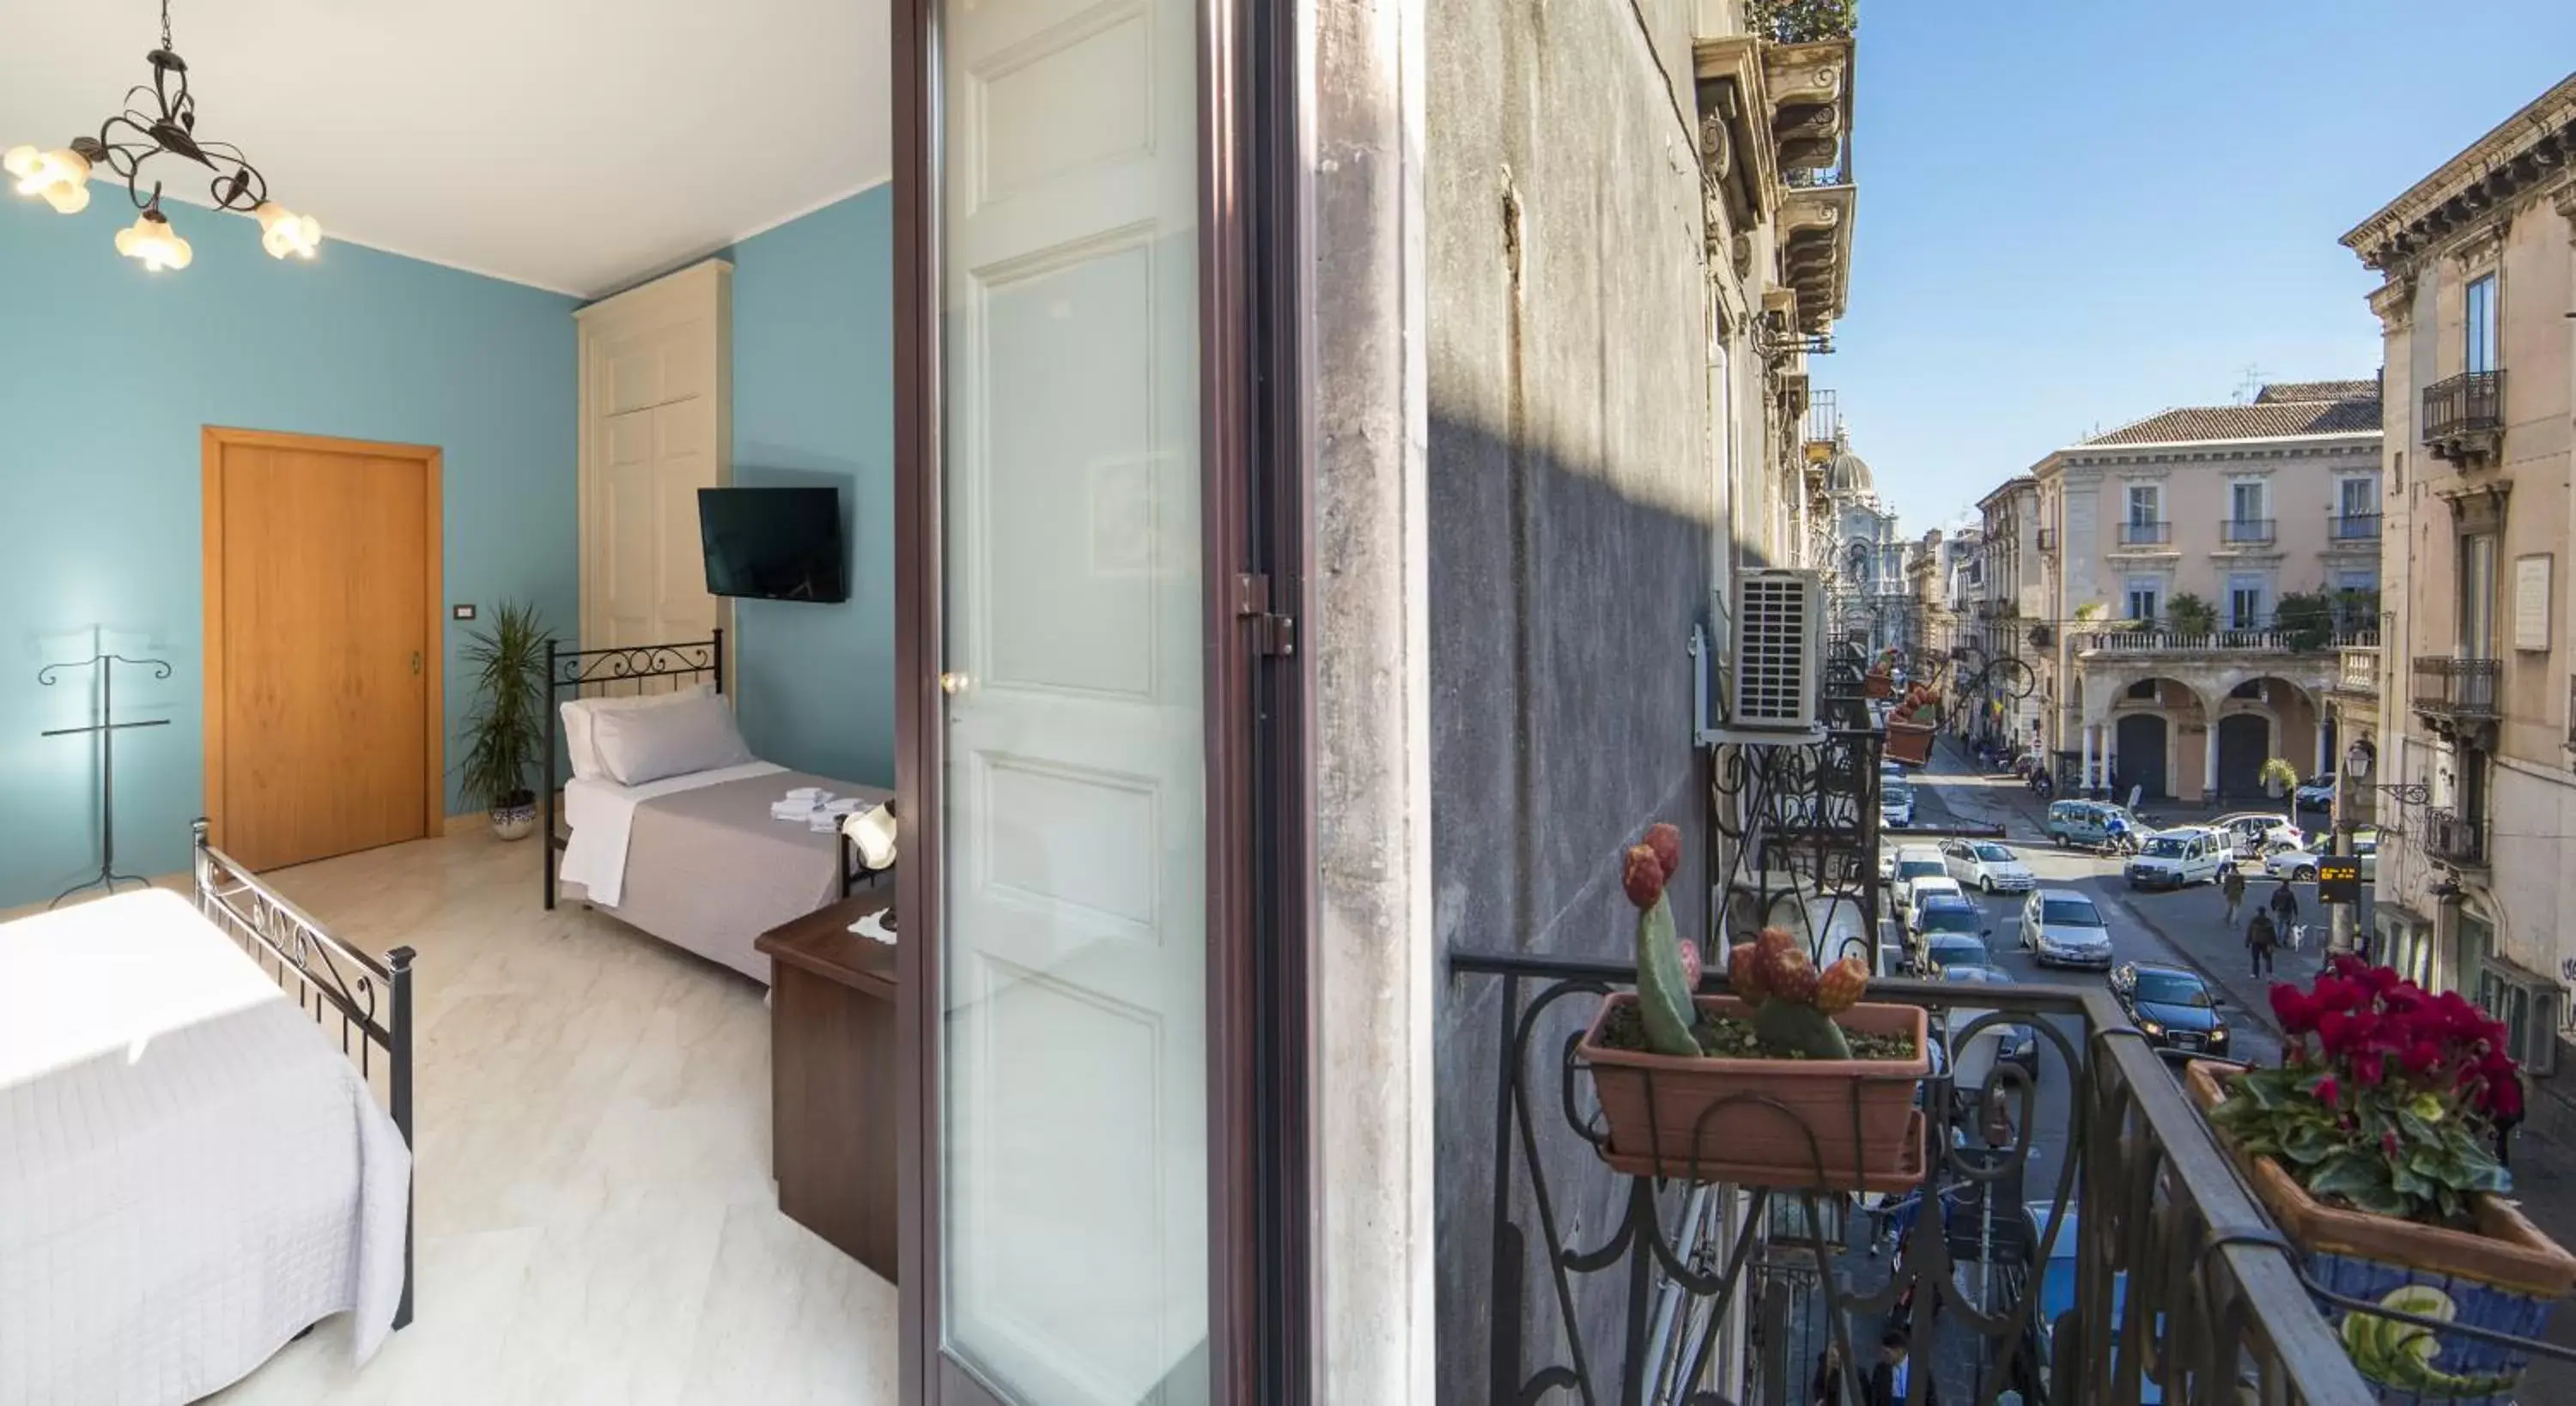 Property building in Catania Inn Rooms